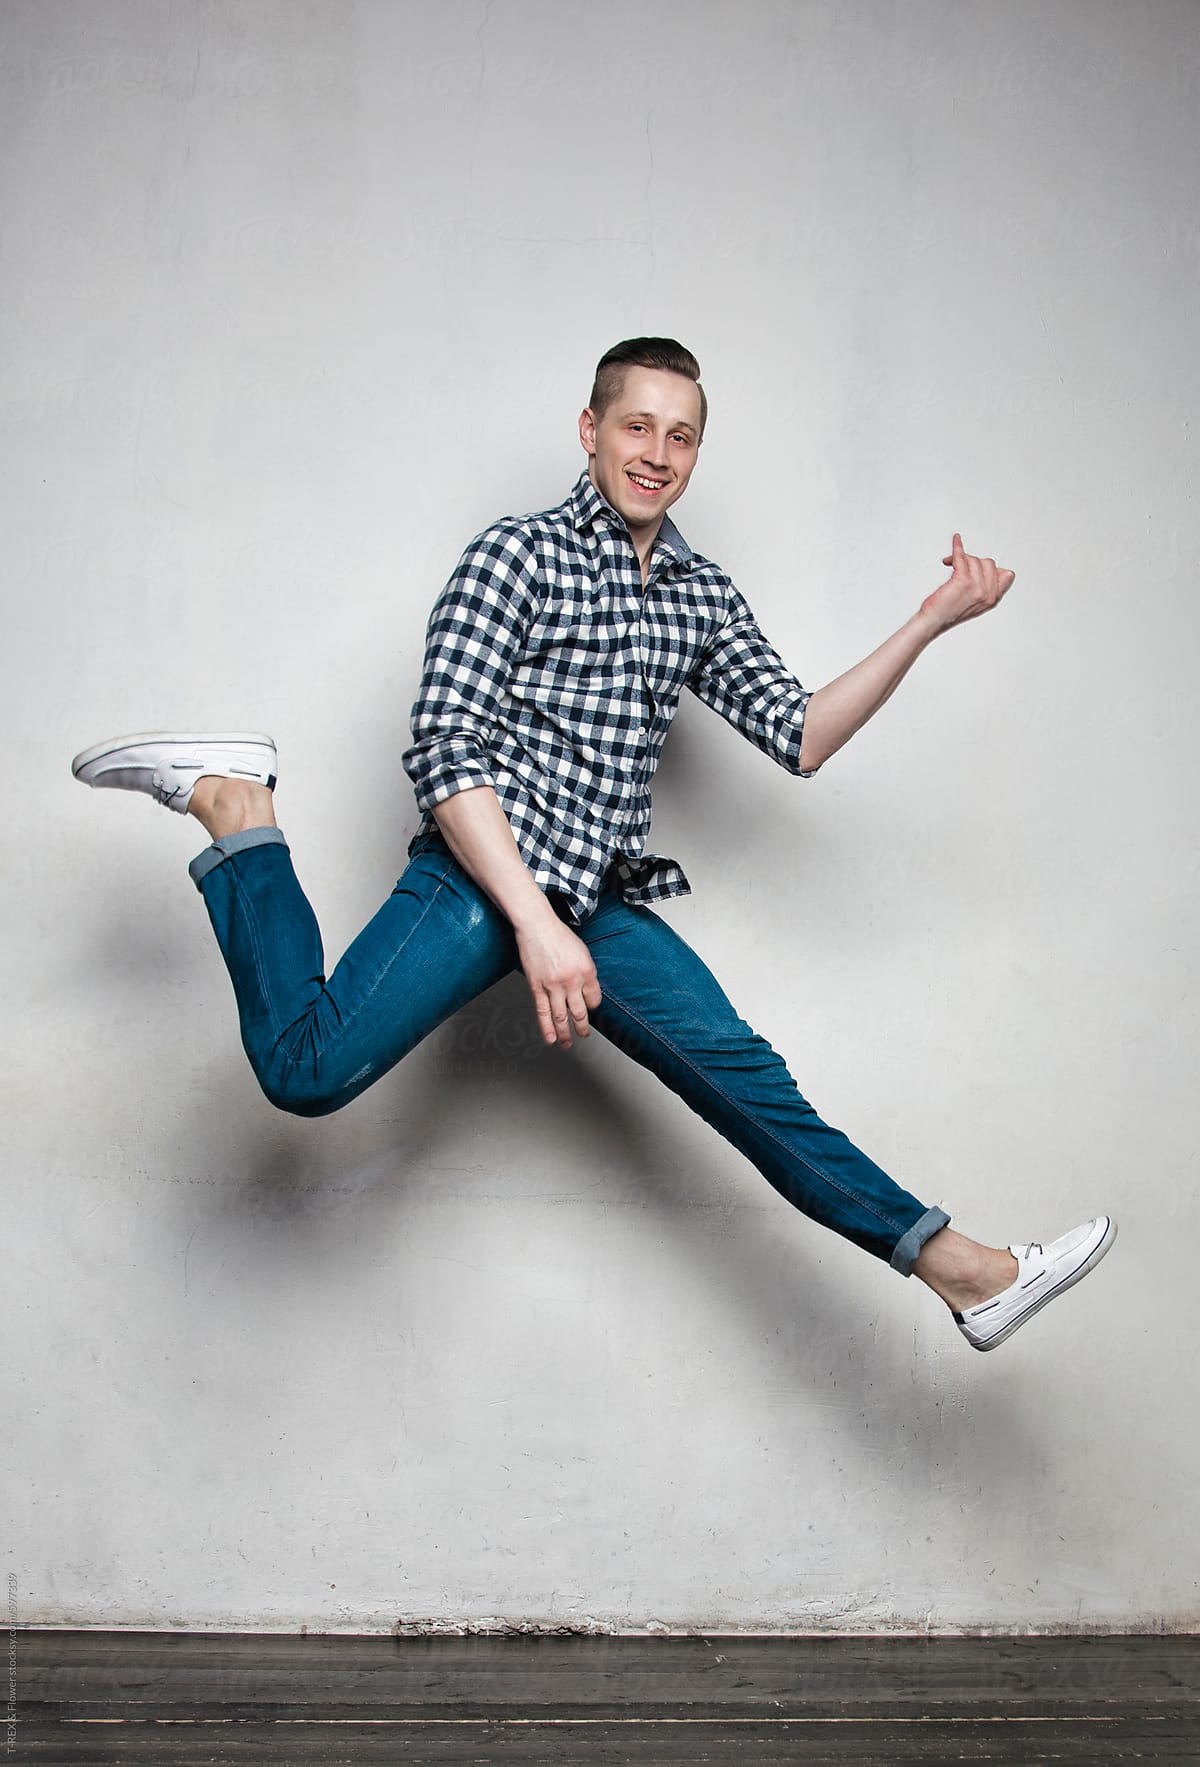 Smiling young male in plaid shirt leaping